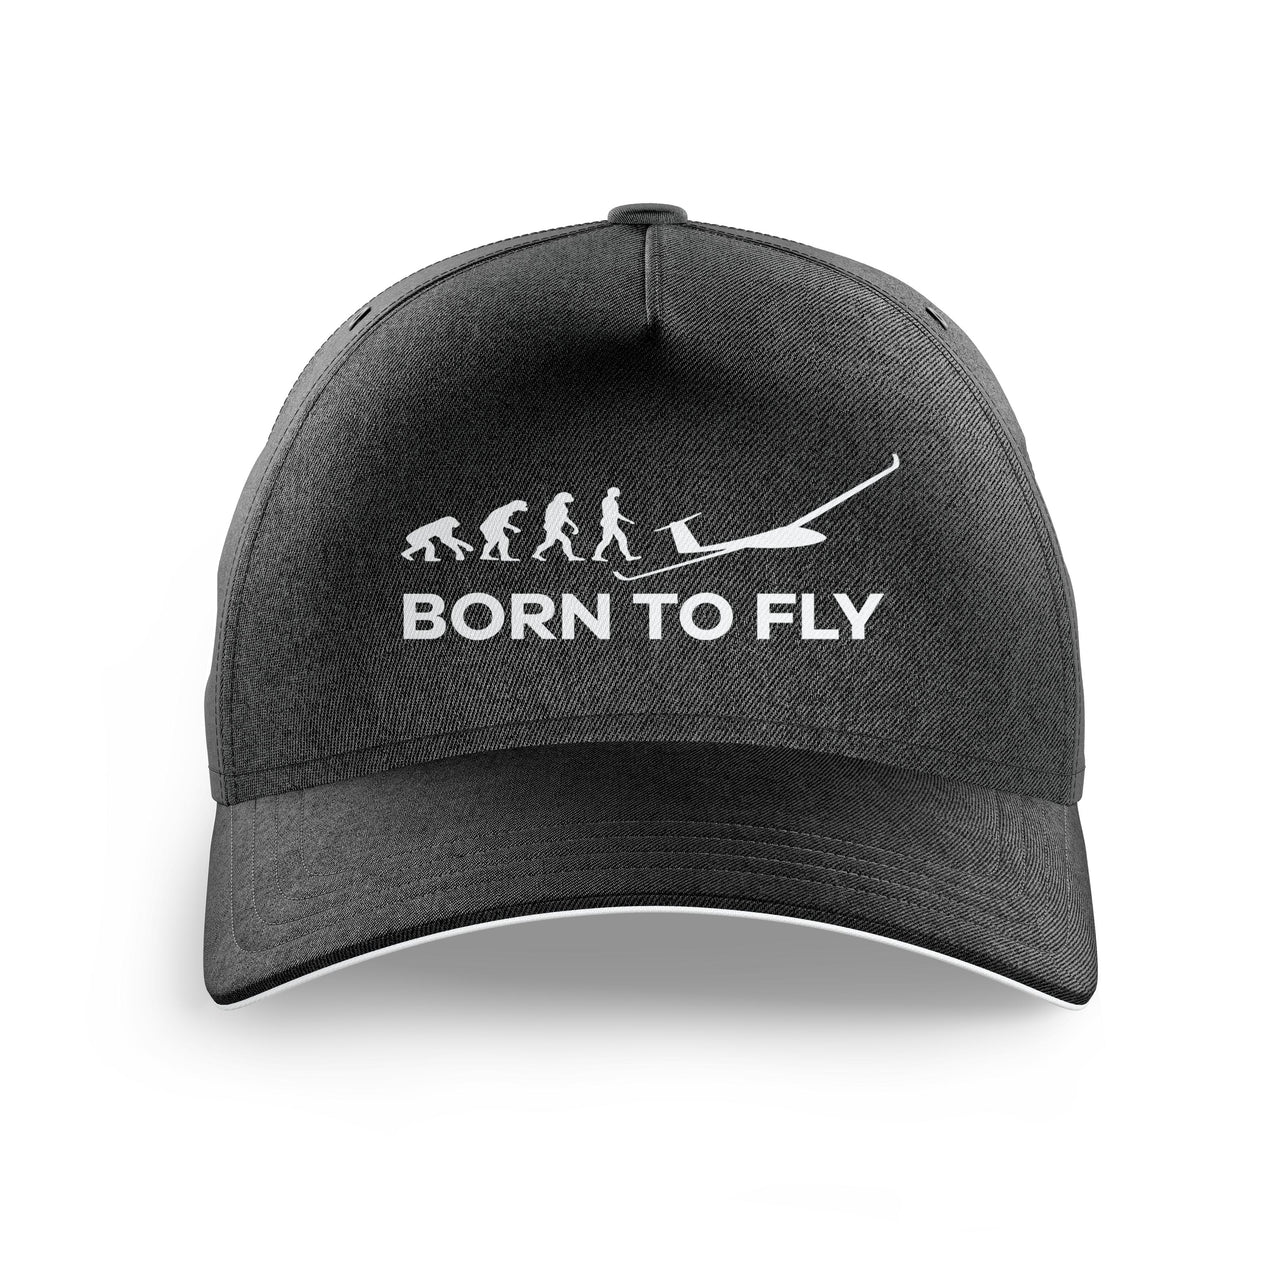 Born To Fly Glider Printed Hats